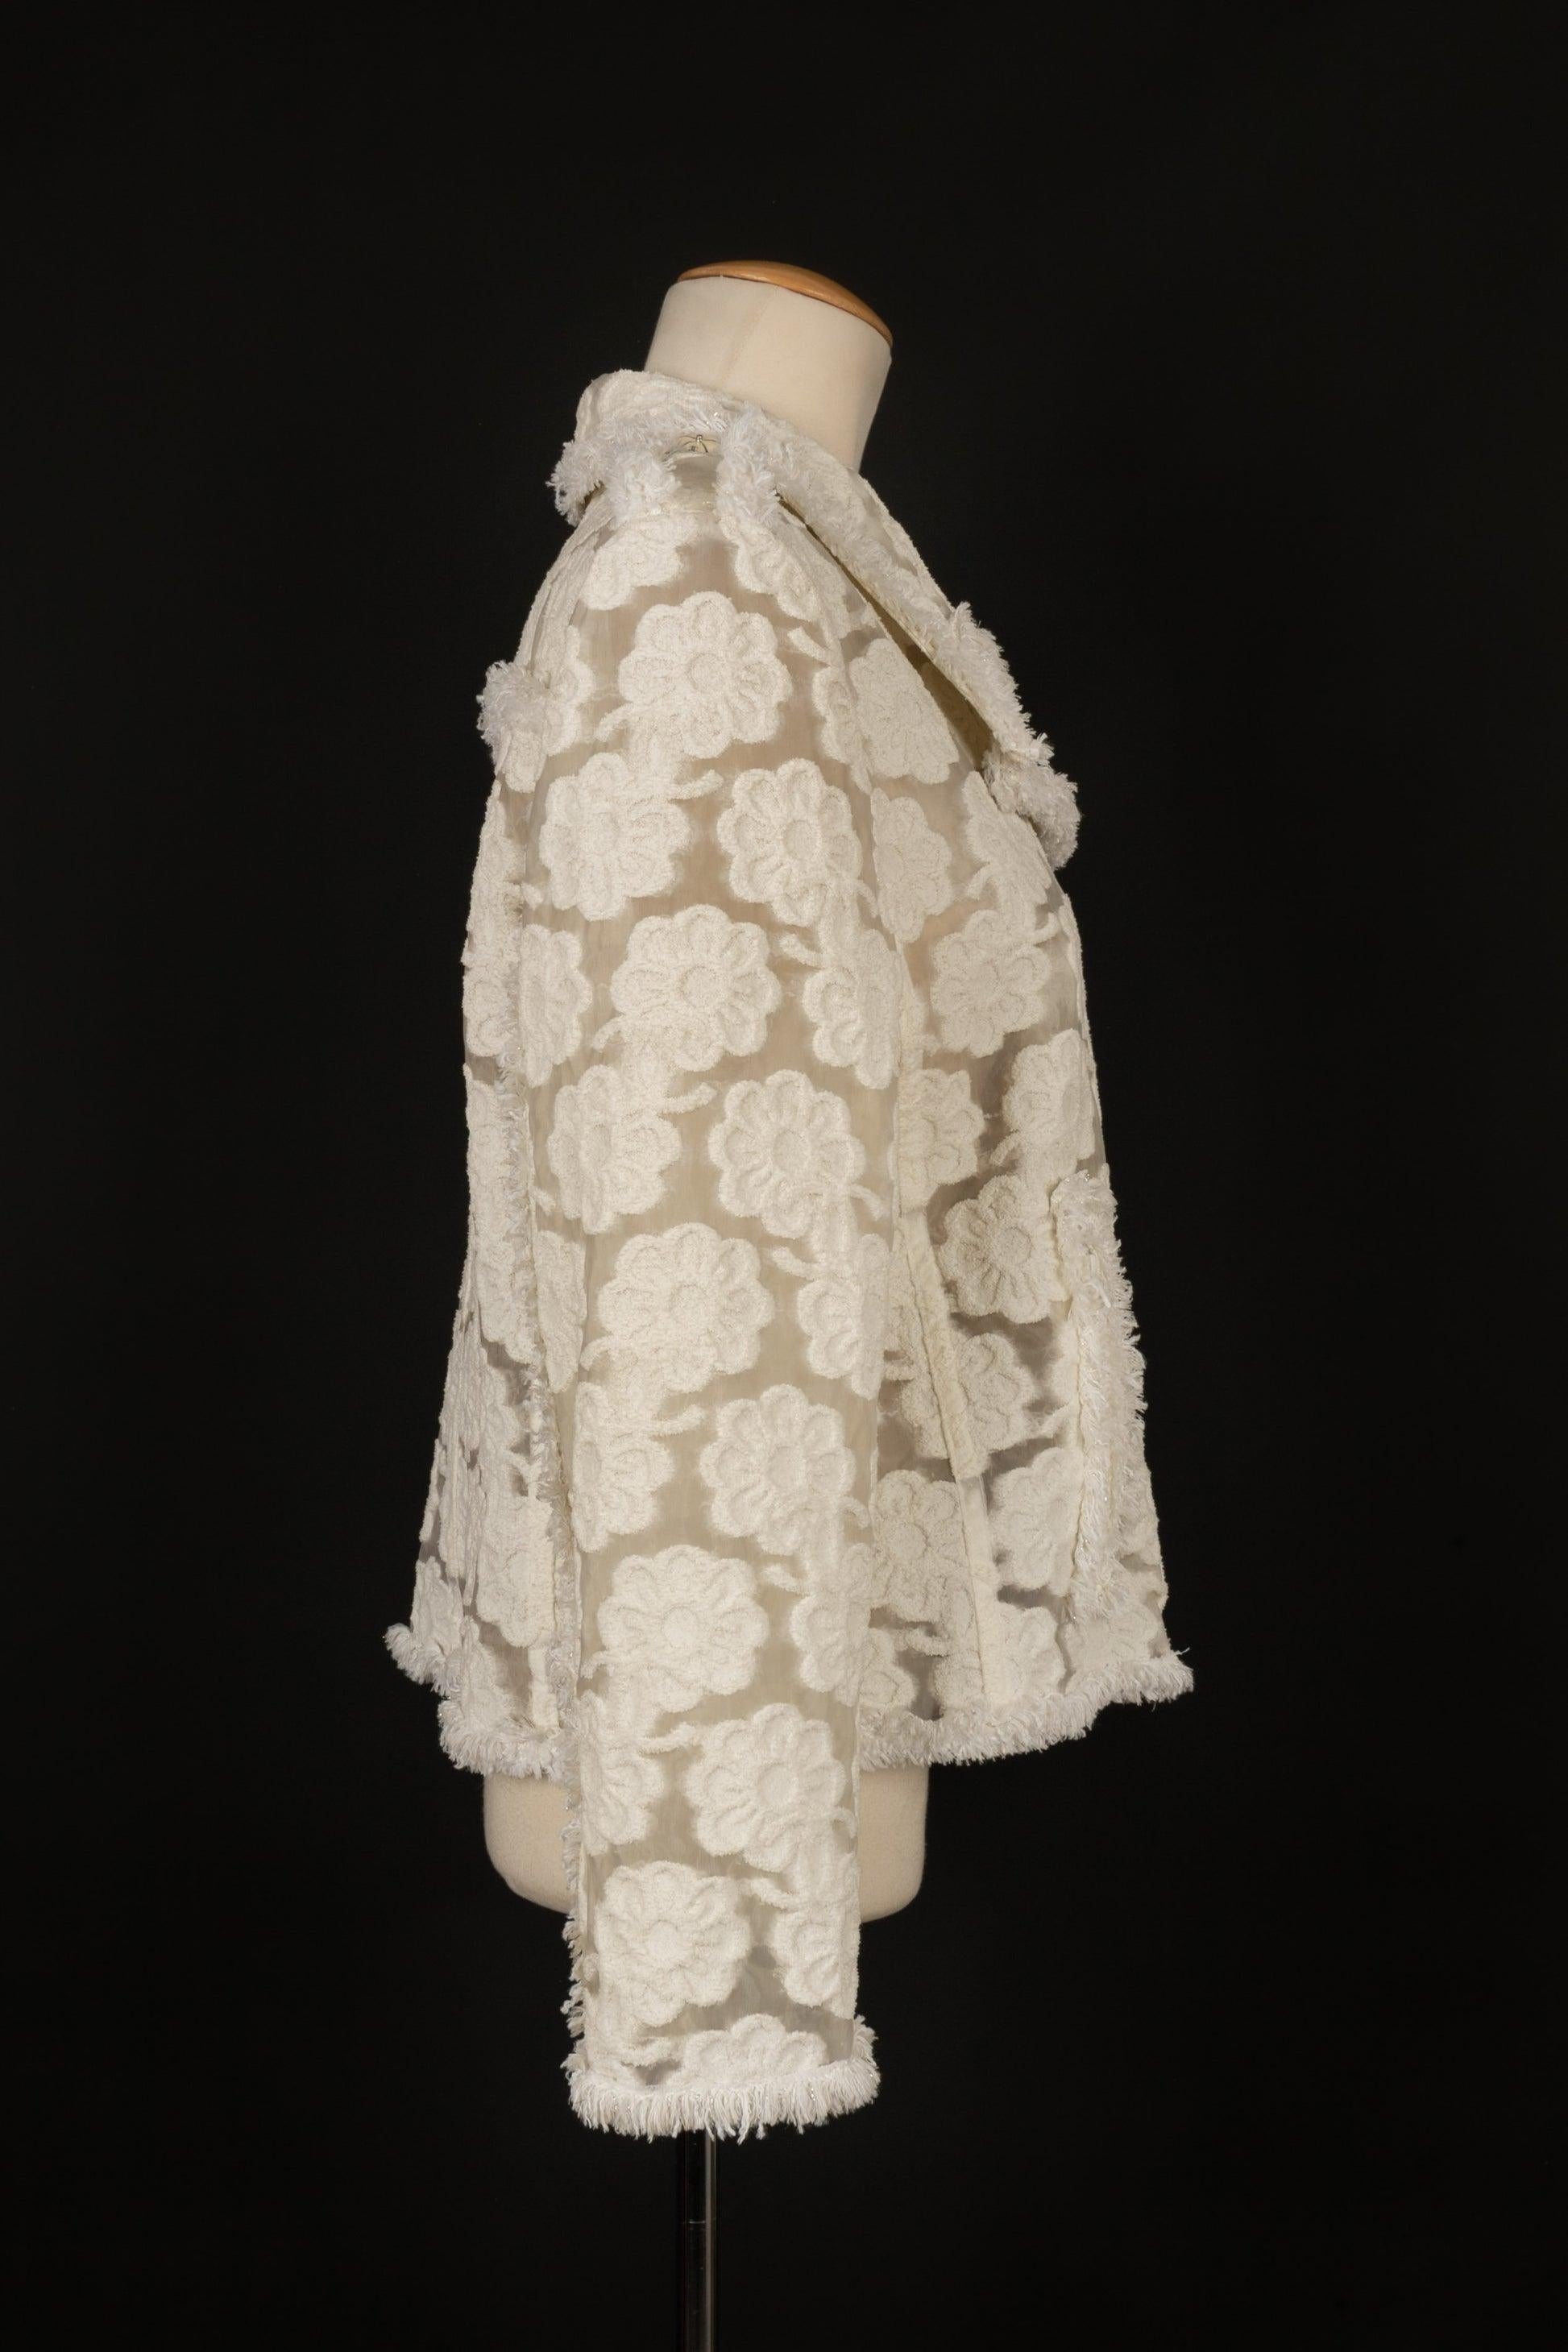 Women's Chanel Blended Cotton Openwork Jacket Representing White Flowers, 2009 For Sale